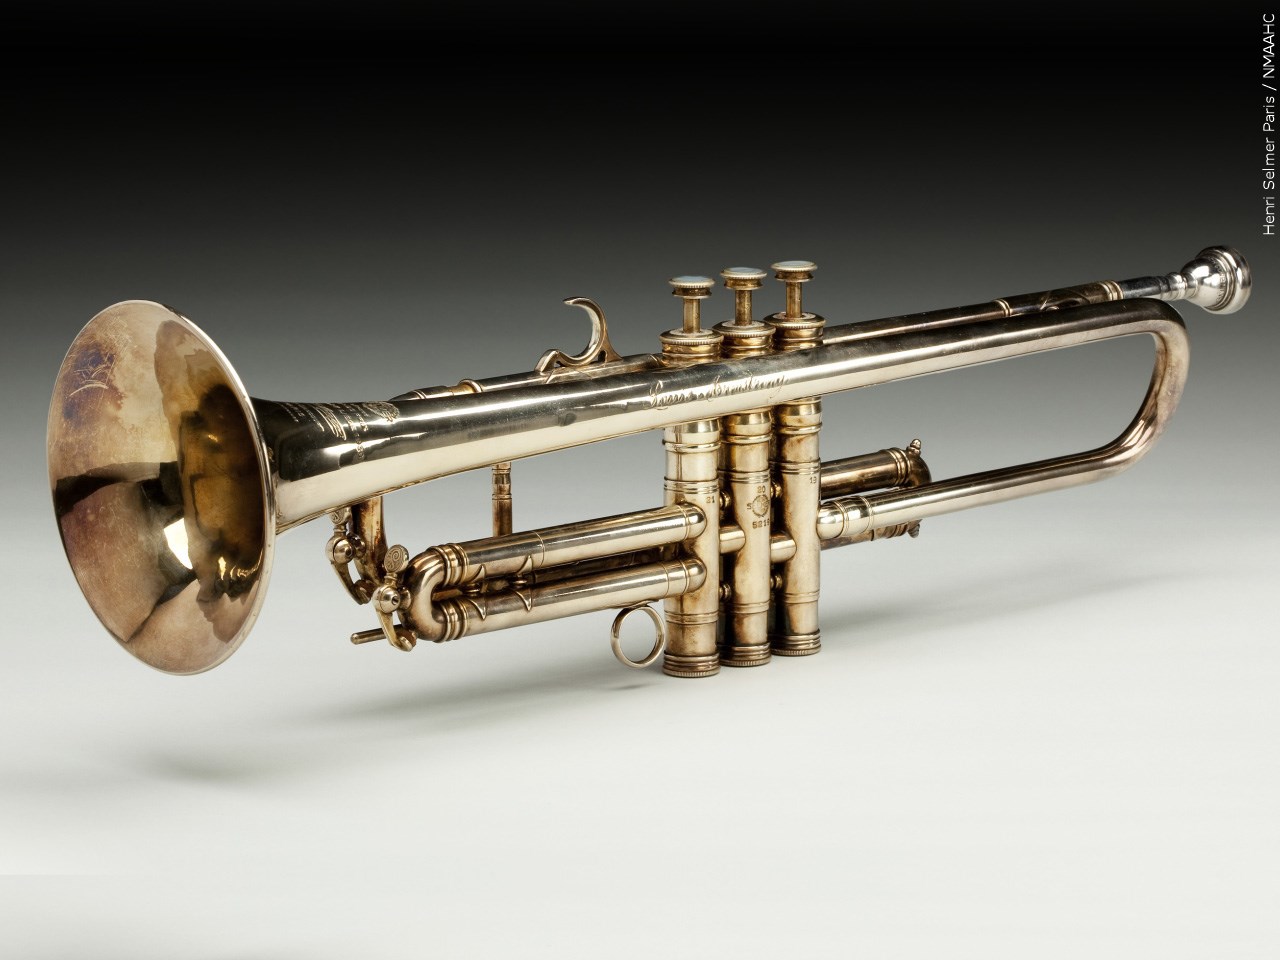 A trumpet used in jazz performances